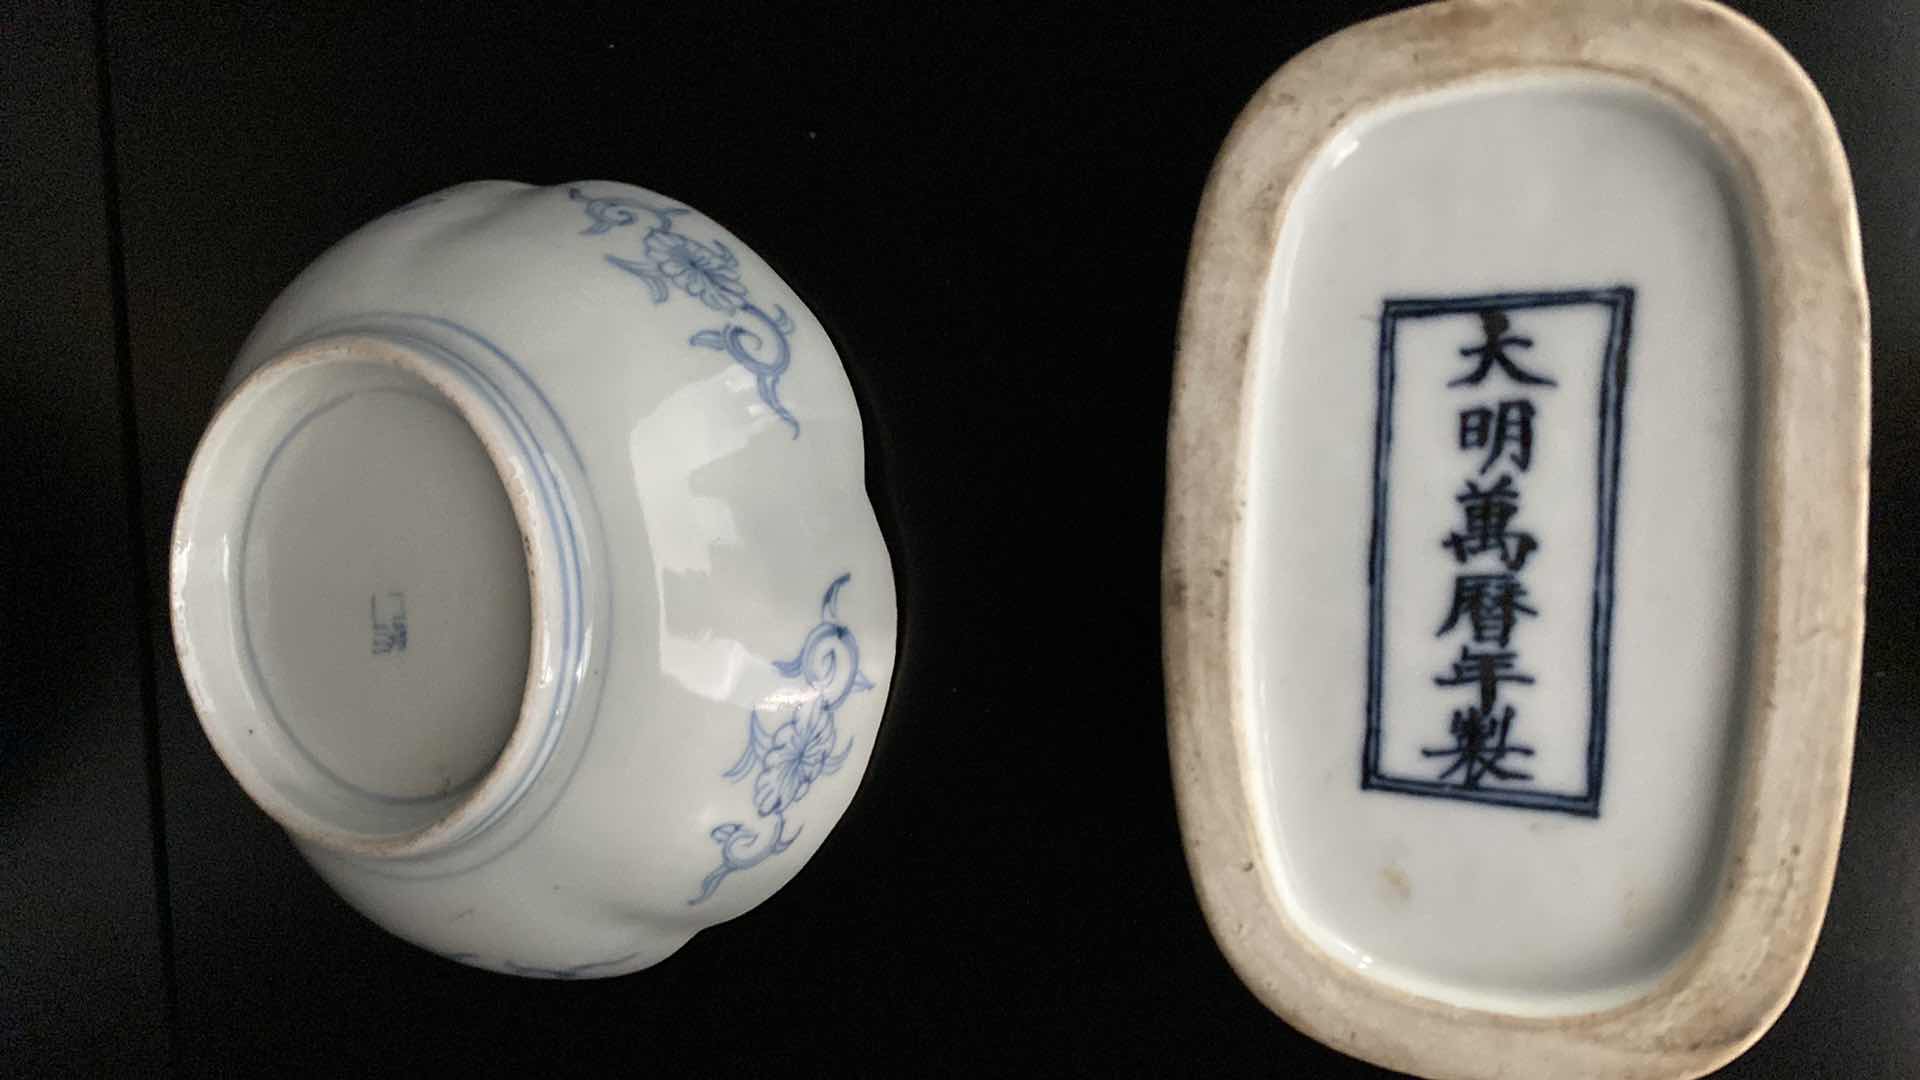 Photo 3 of CHINESE CLOISONNÉ PORCELAIN BOWL 6” AND TRINKET BOX 5”